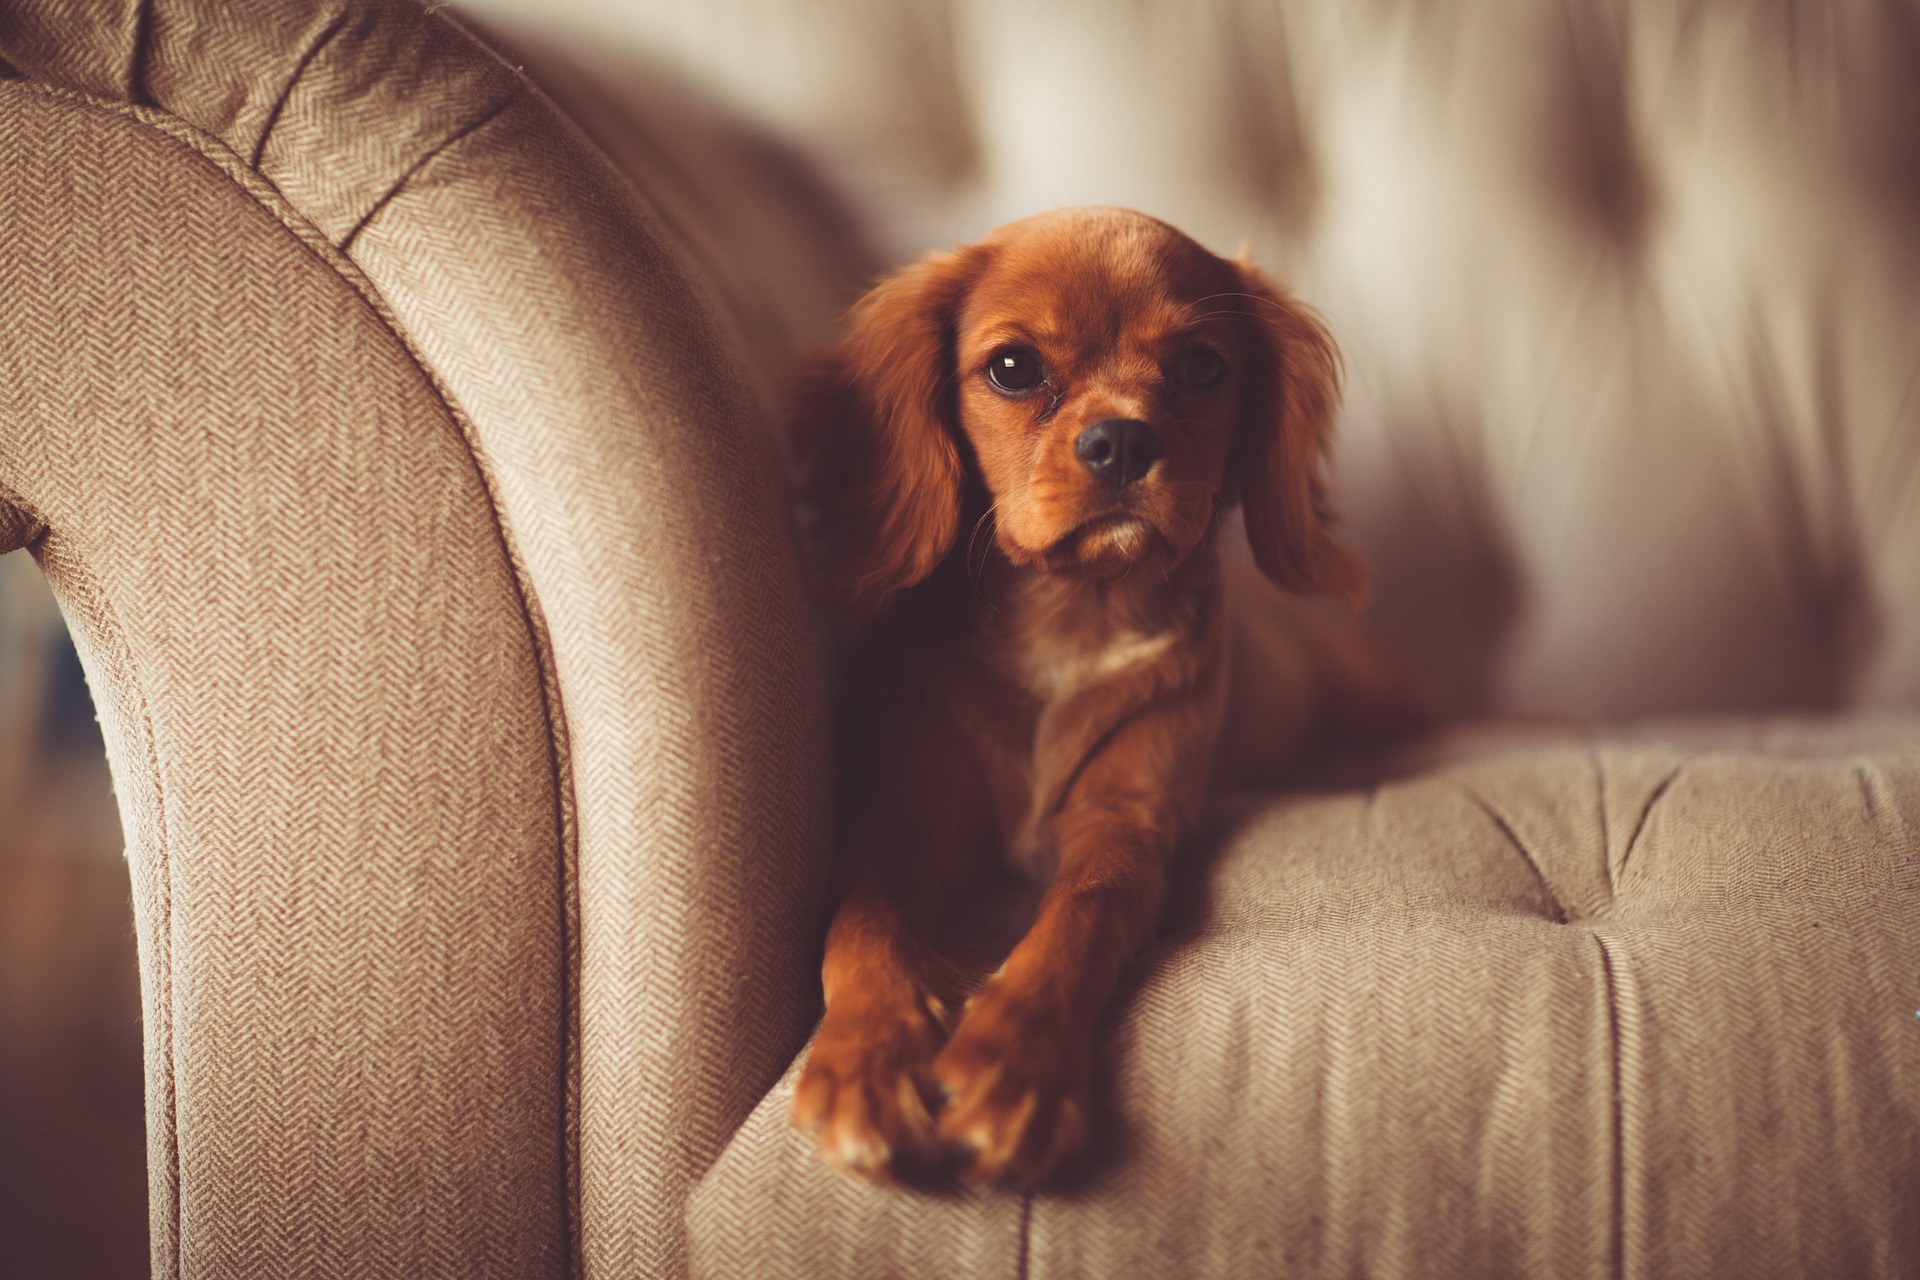 A small dog sitting on a sofa; our team at MG Legal offer home visits, by appointment, so you can seek legal advice from the comfort of your own home.